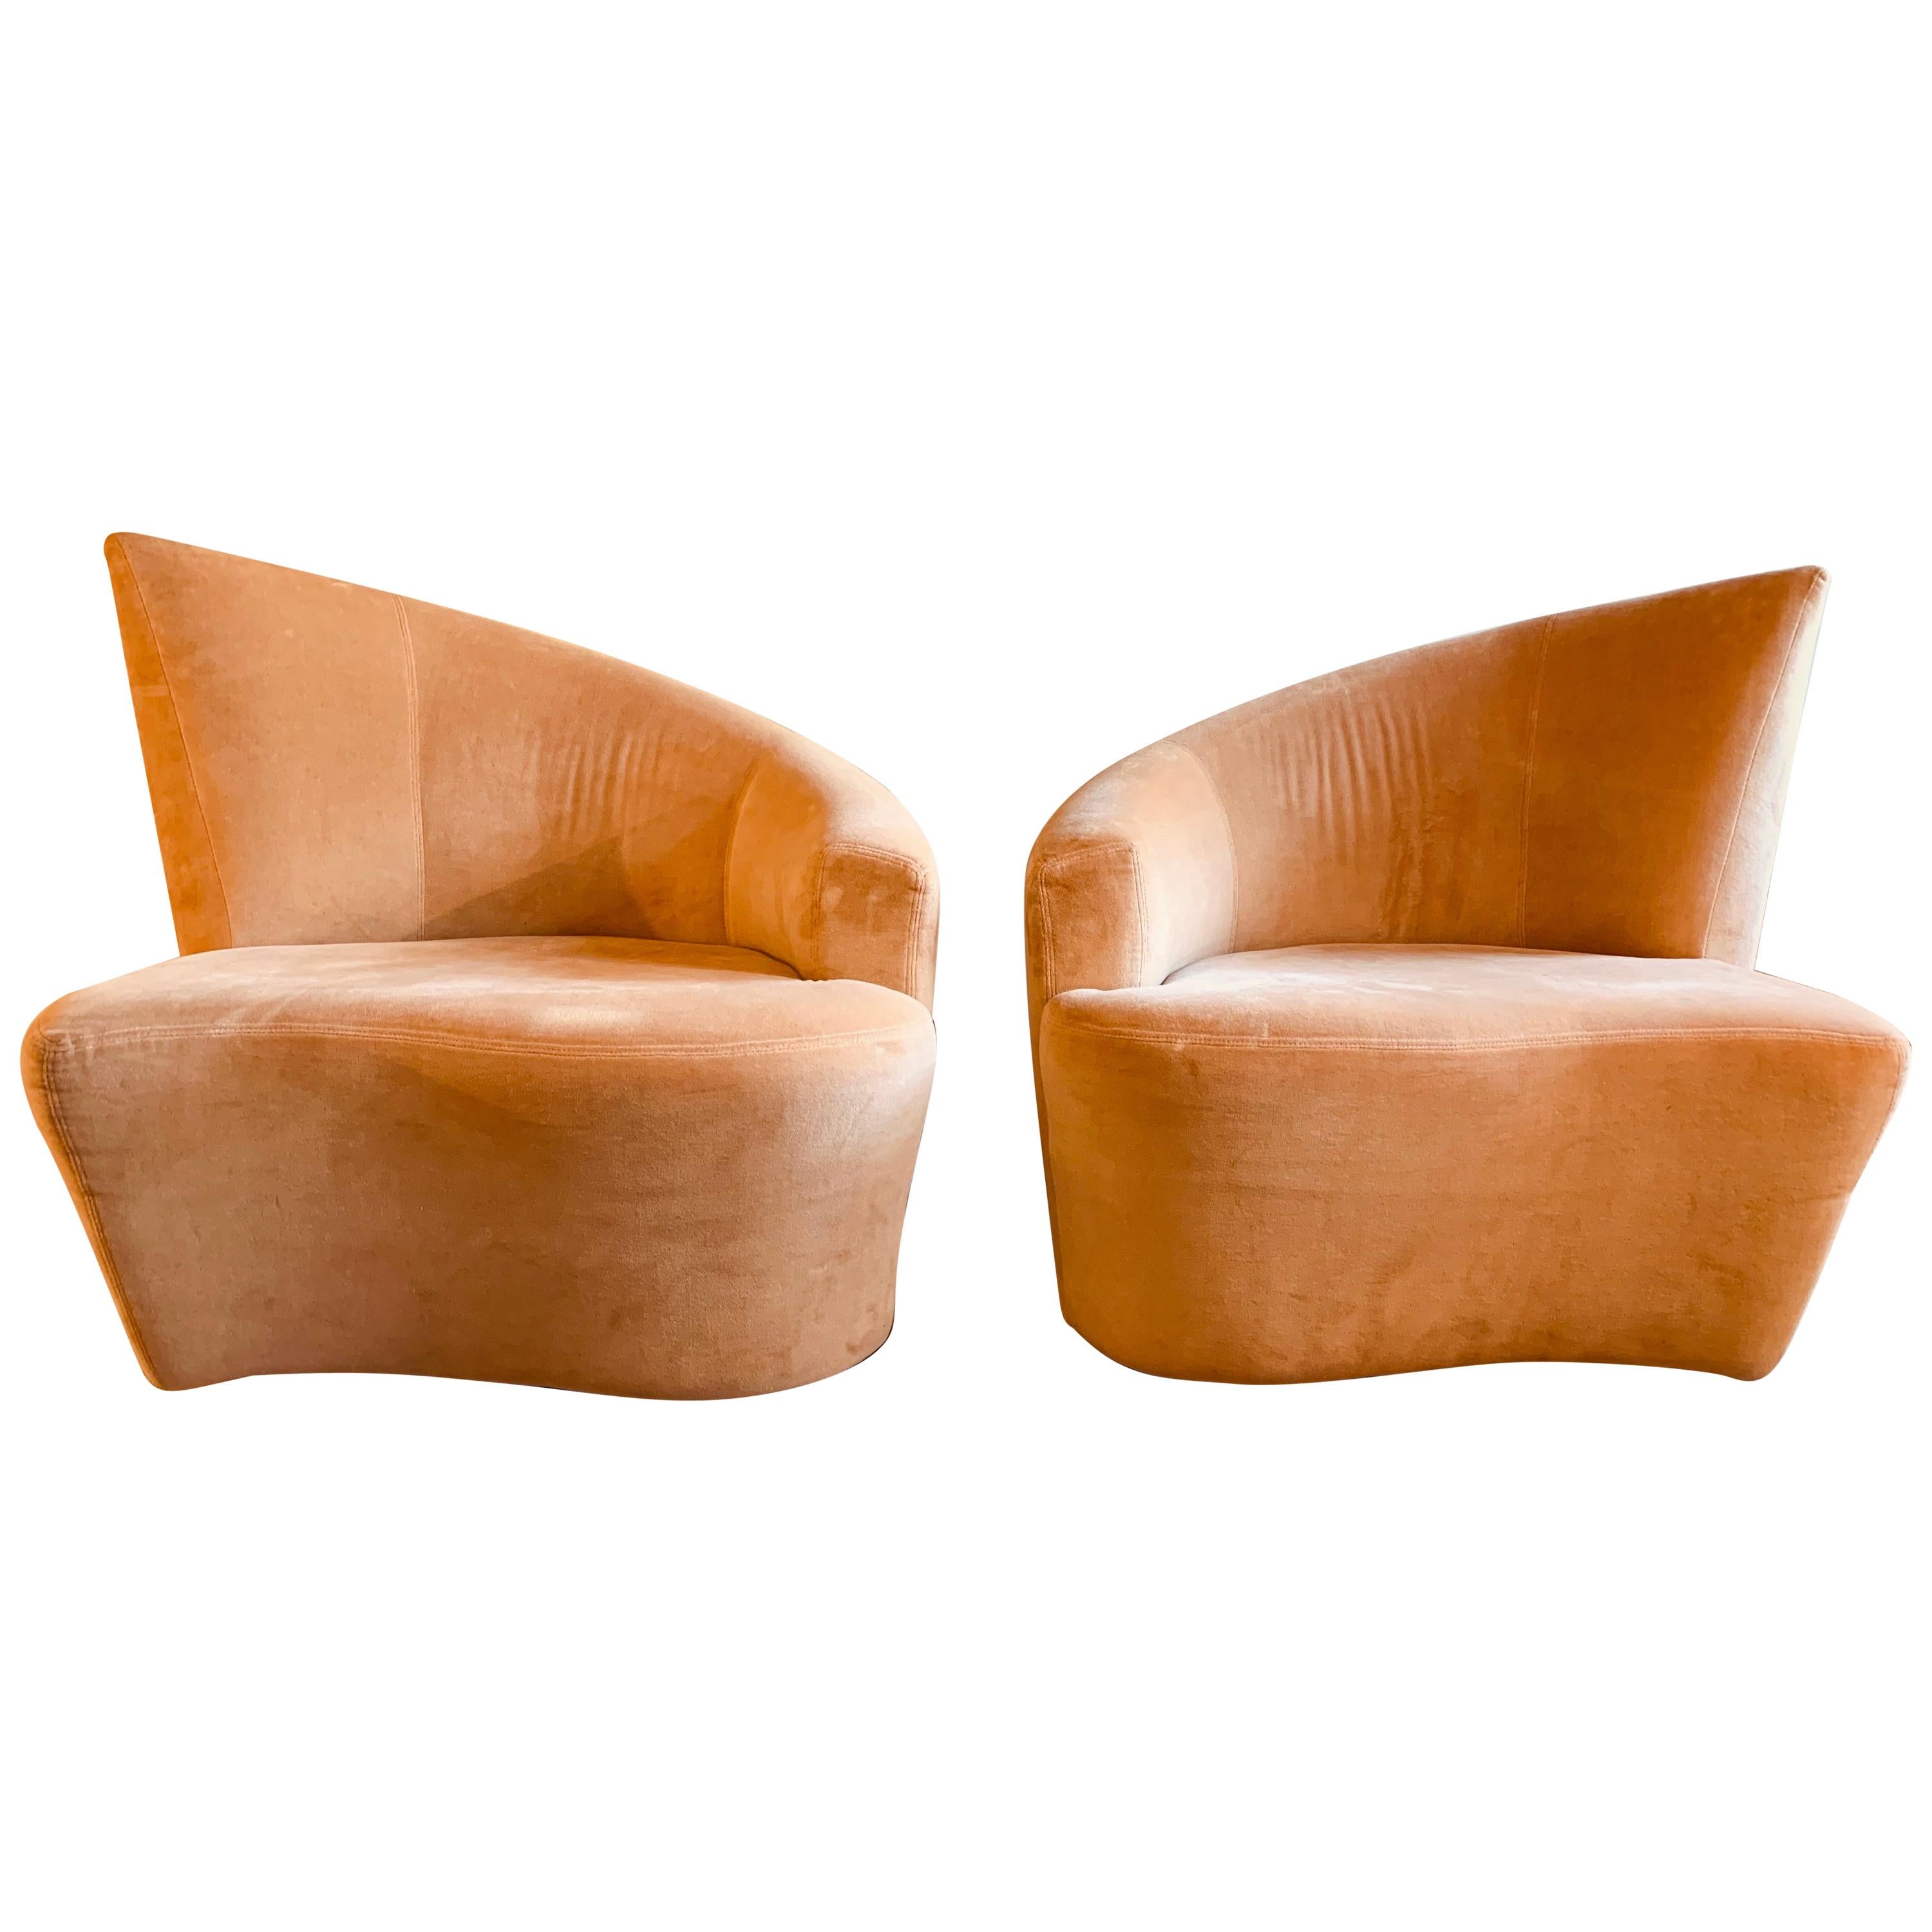 "Bilbao" Swivel Lounge Chairs Designed by Vladimir Kagan for Weiman, a Pair